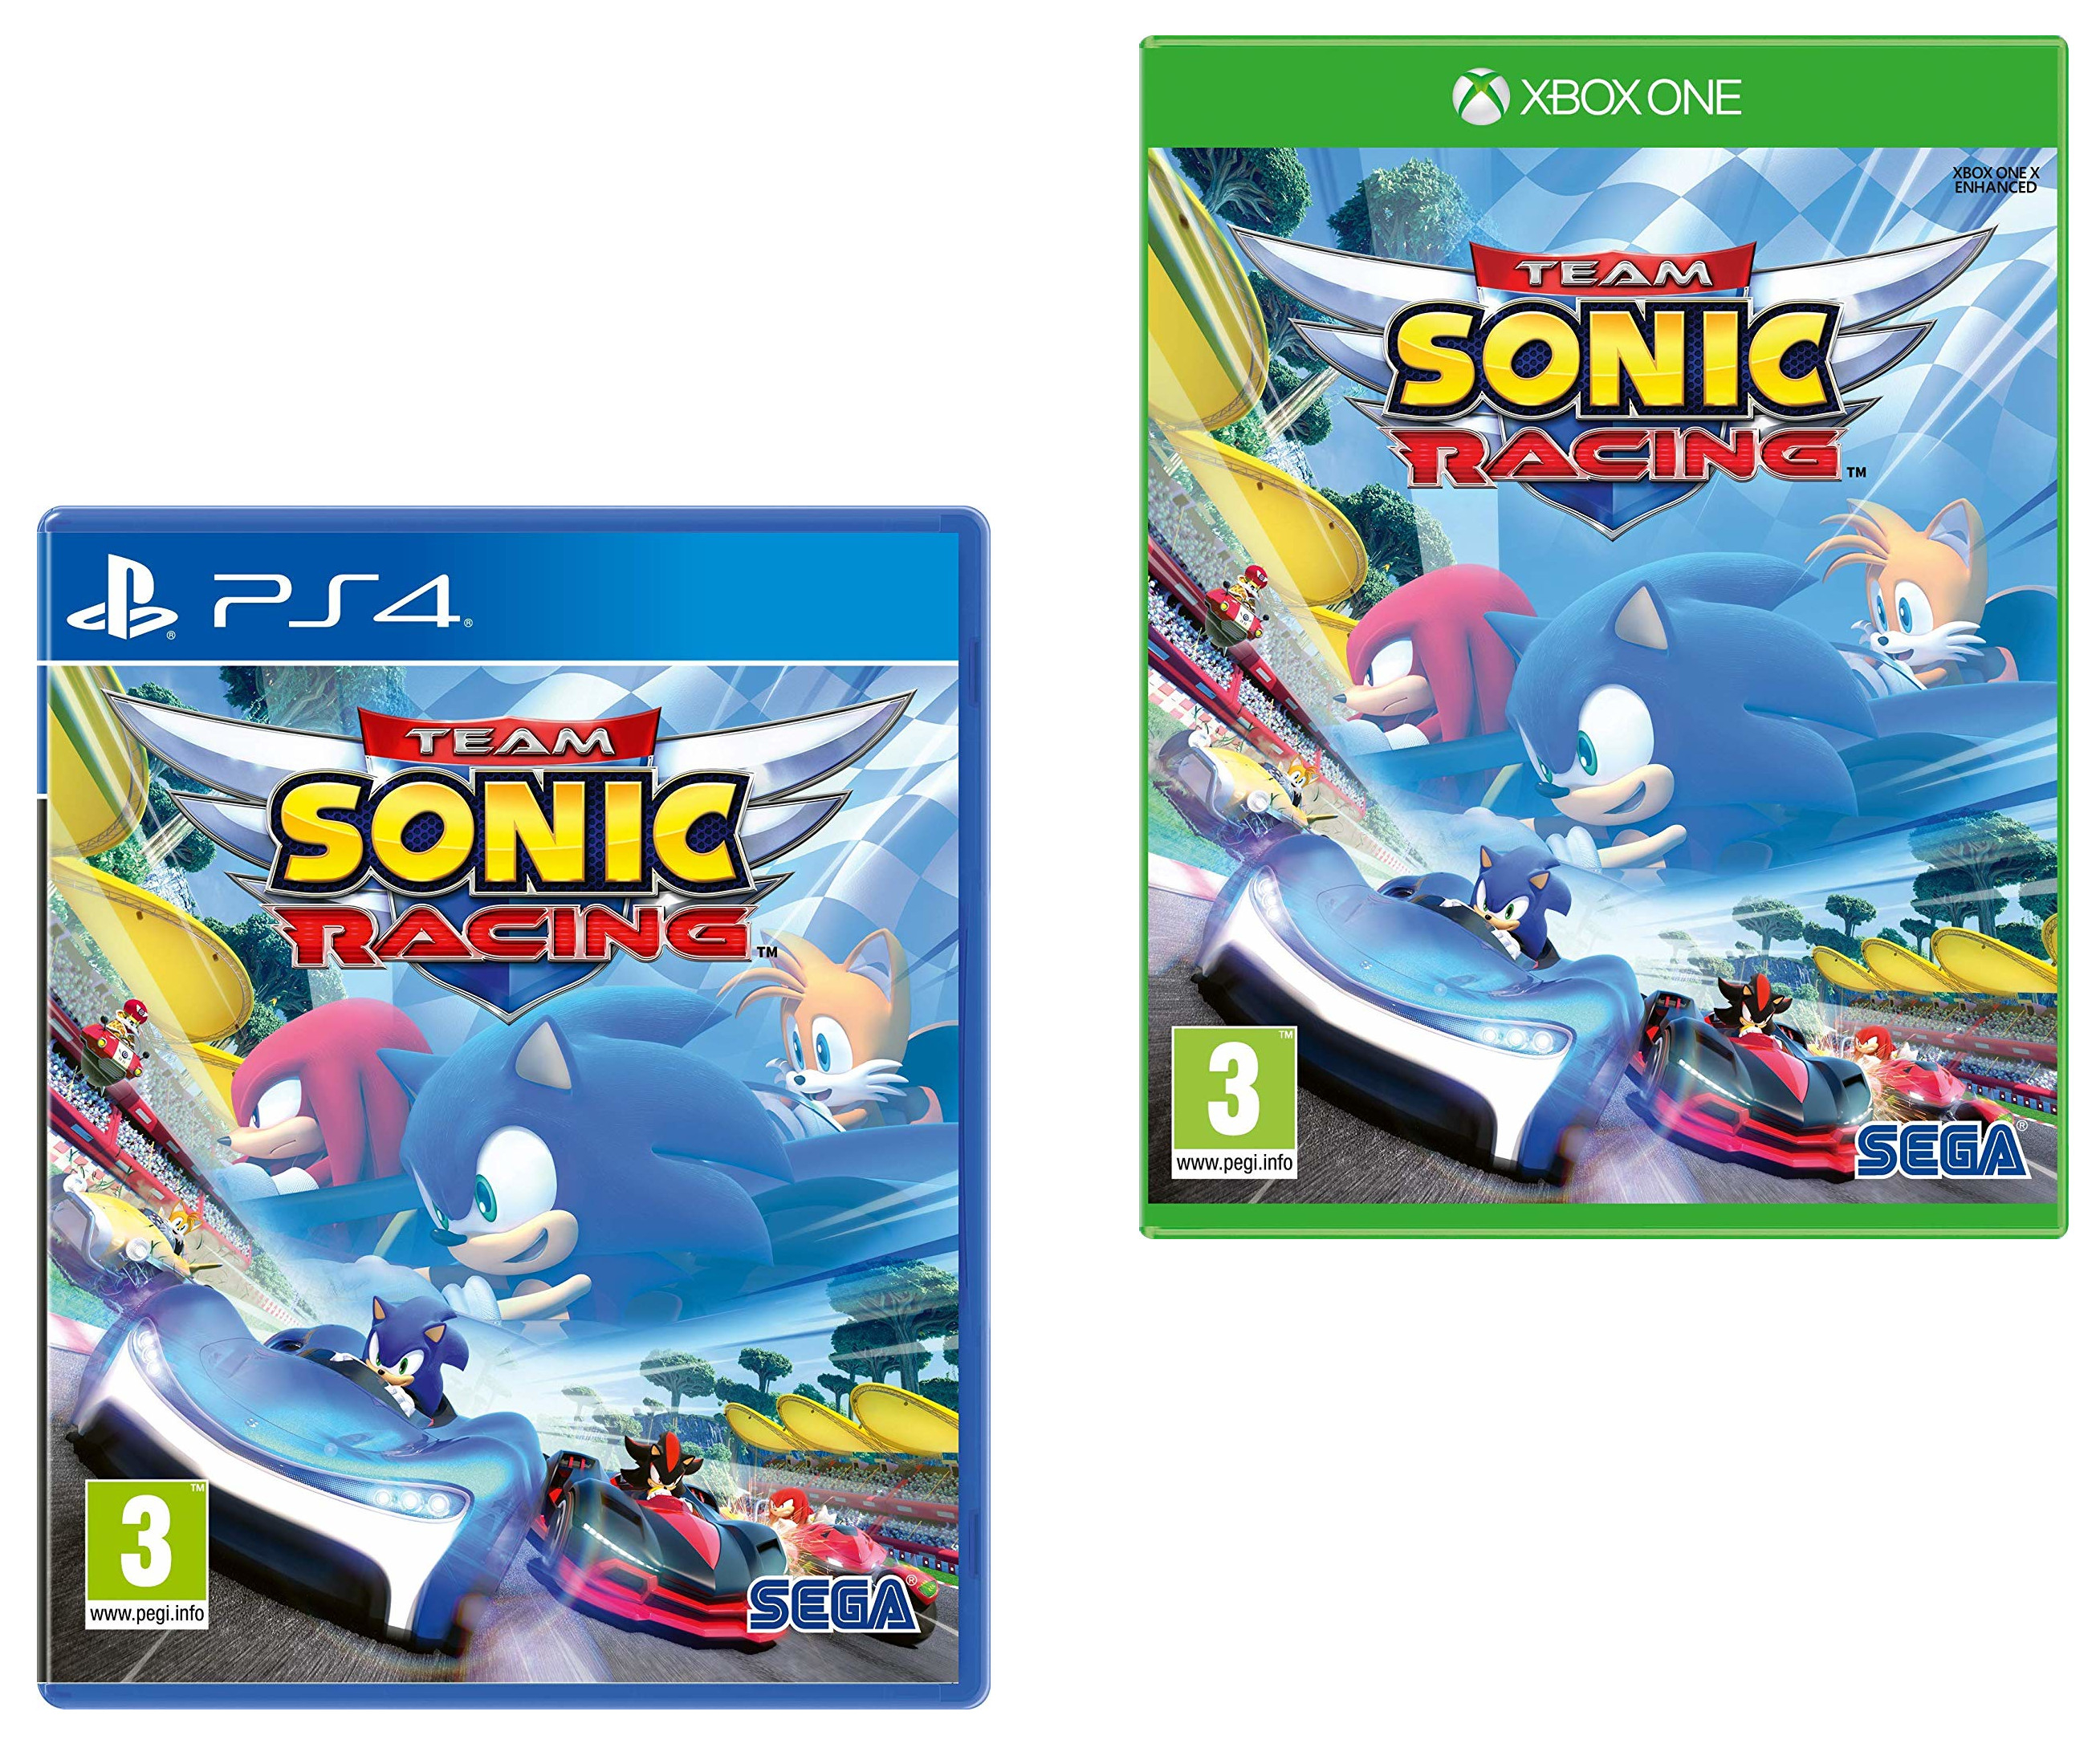 144Â° - Team Sonic Racing (PS4 / Xbox One) for Â£15.99 (Prime) / Â£20.48 (Non Prime) delivered @ Amazon